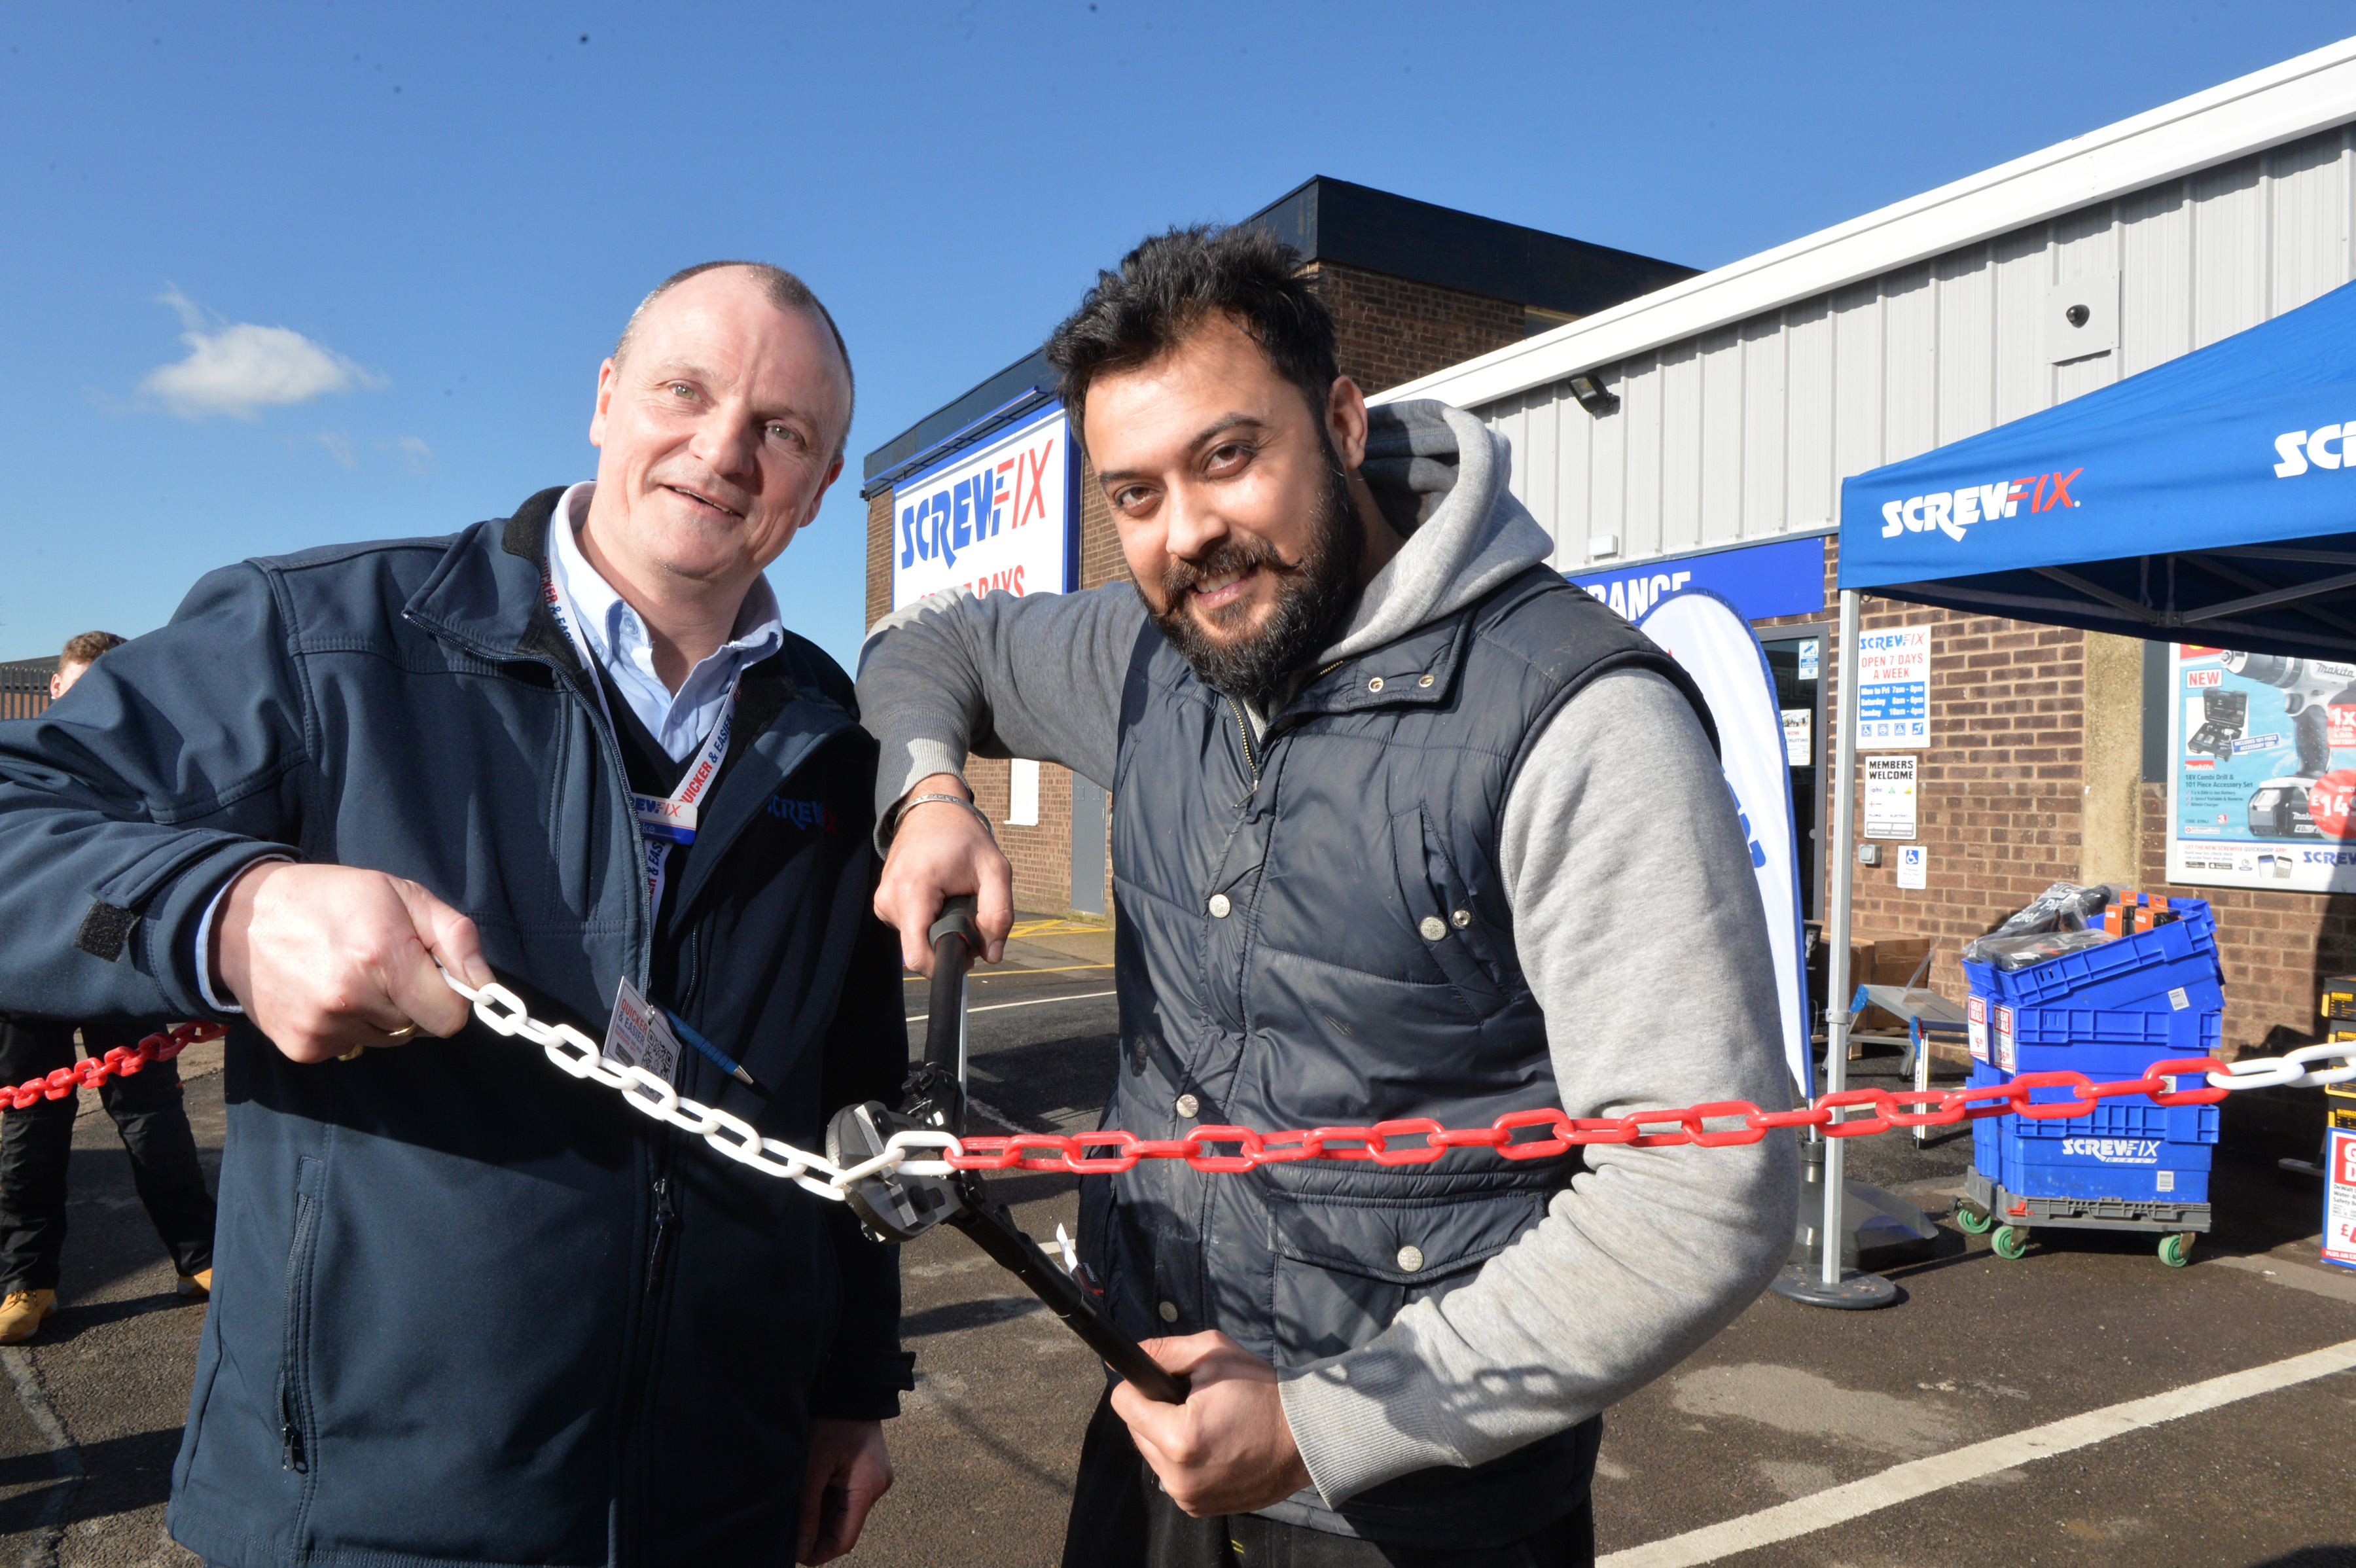 Leicester’s second Screwfix store is declared a runaway success